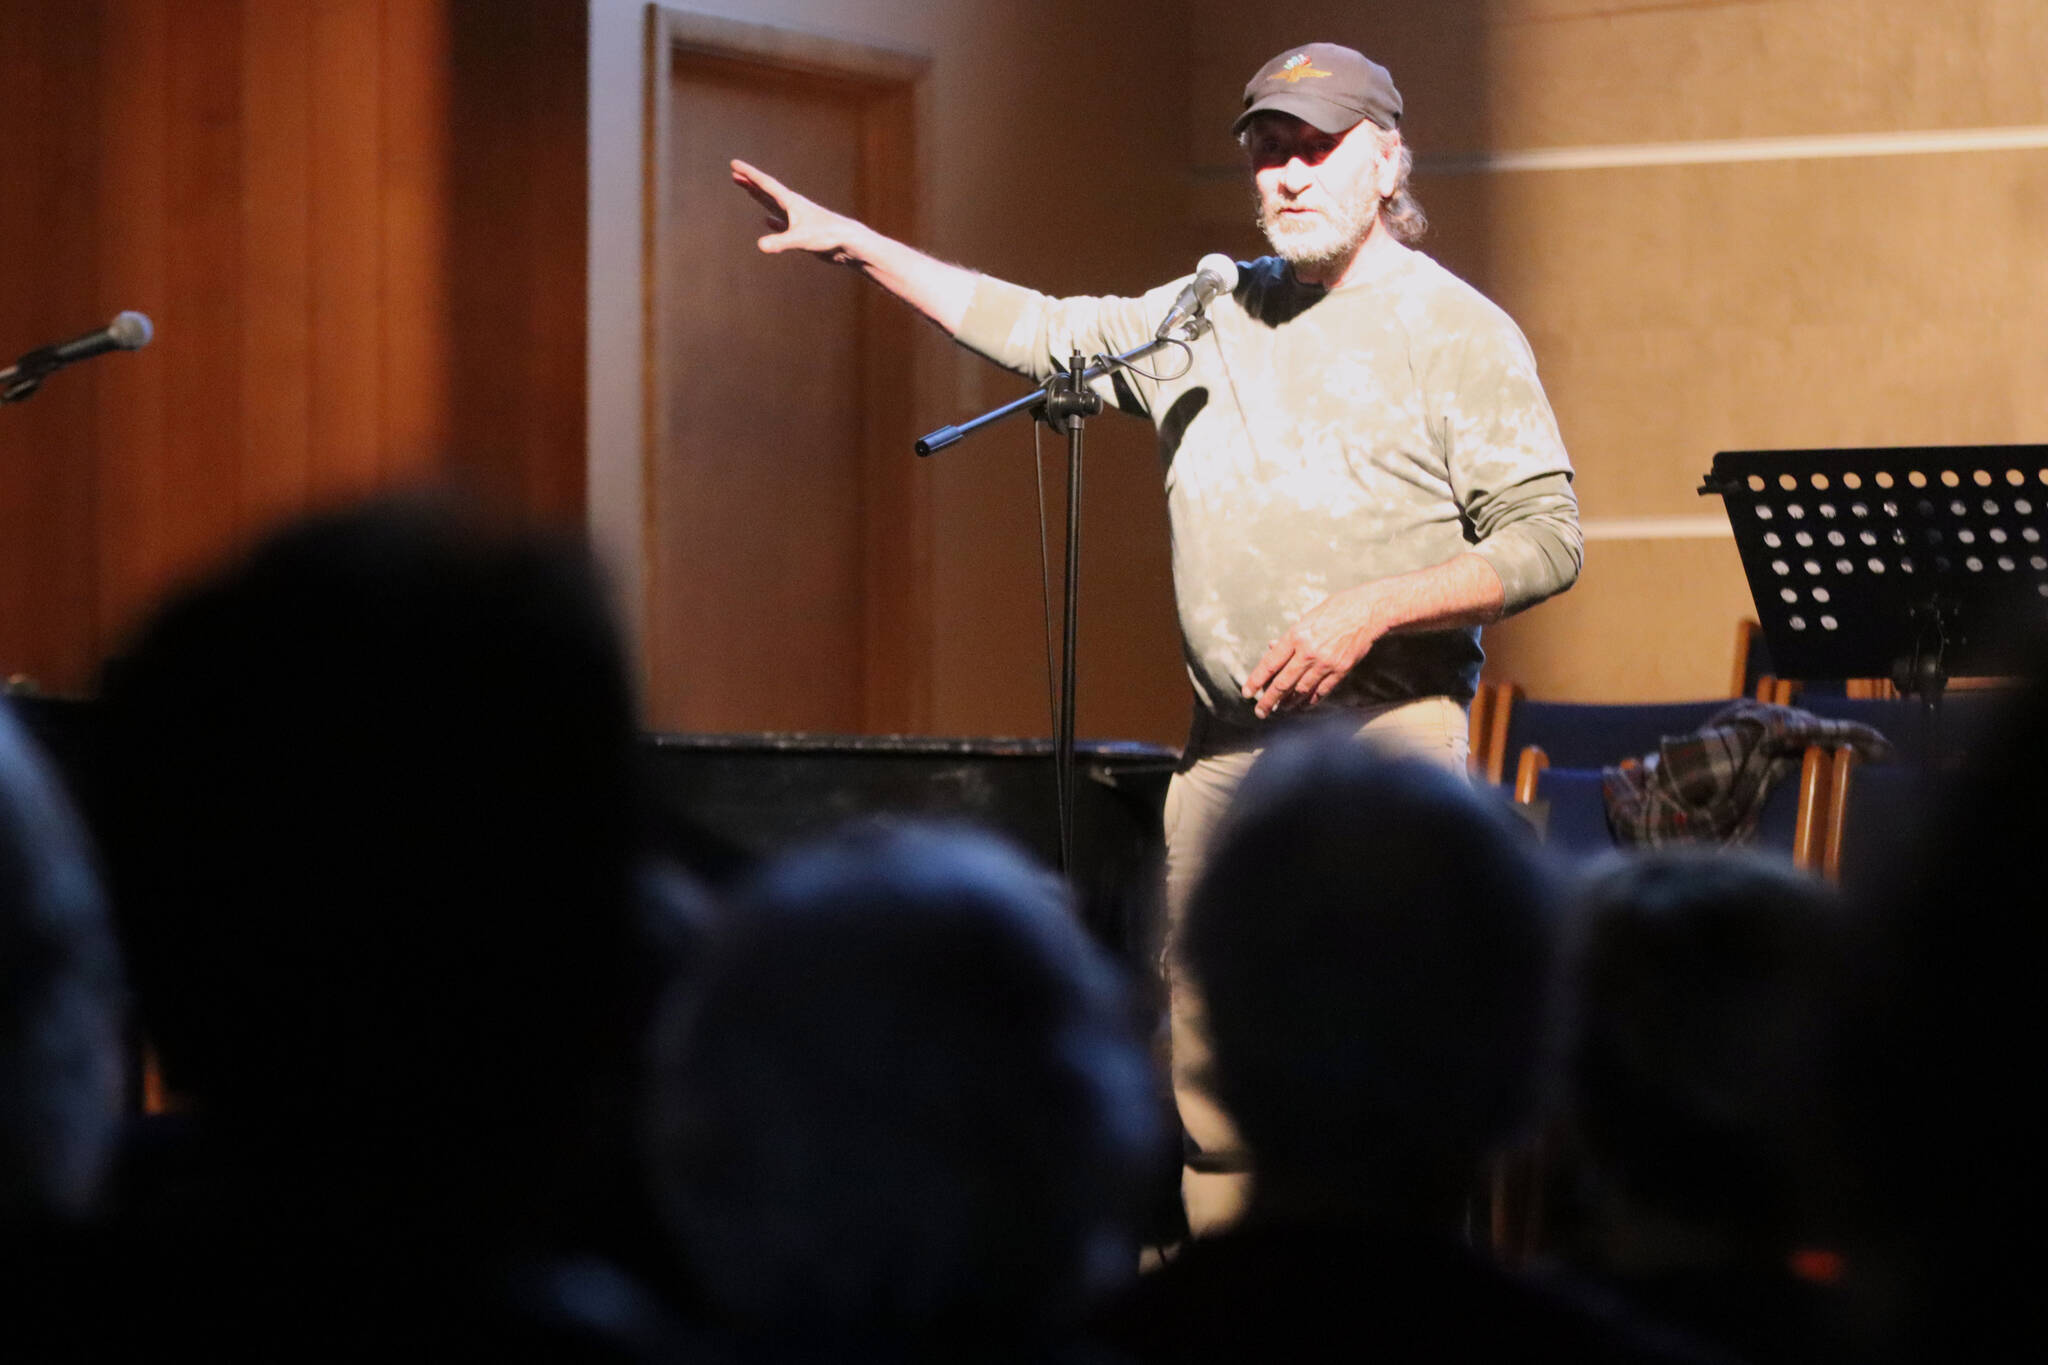 Alan Cleveland shares his experiences as a Juneau taxi driver to a packed house at Ḵunéix̱ Hídi Northern Light United Church as part of Mudrooms final showcase of the season on Tuesday night. (Jonson Kuhn / Juneau Empire)